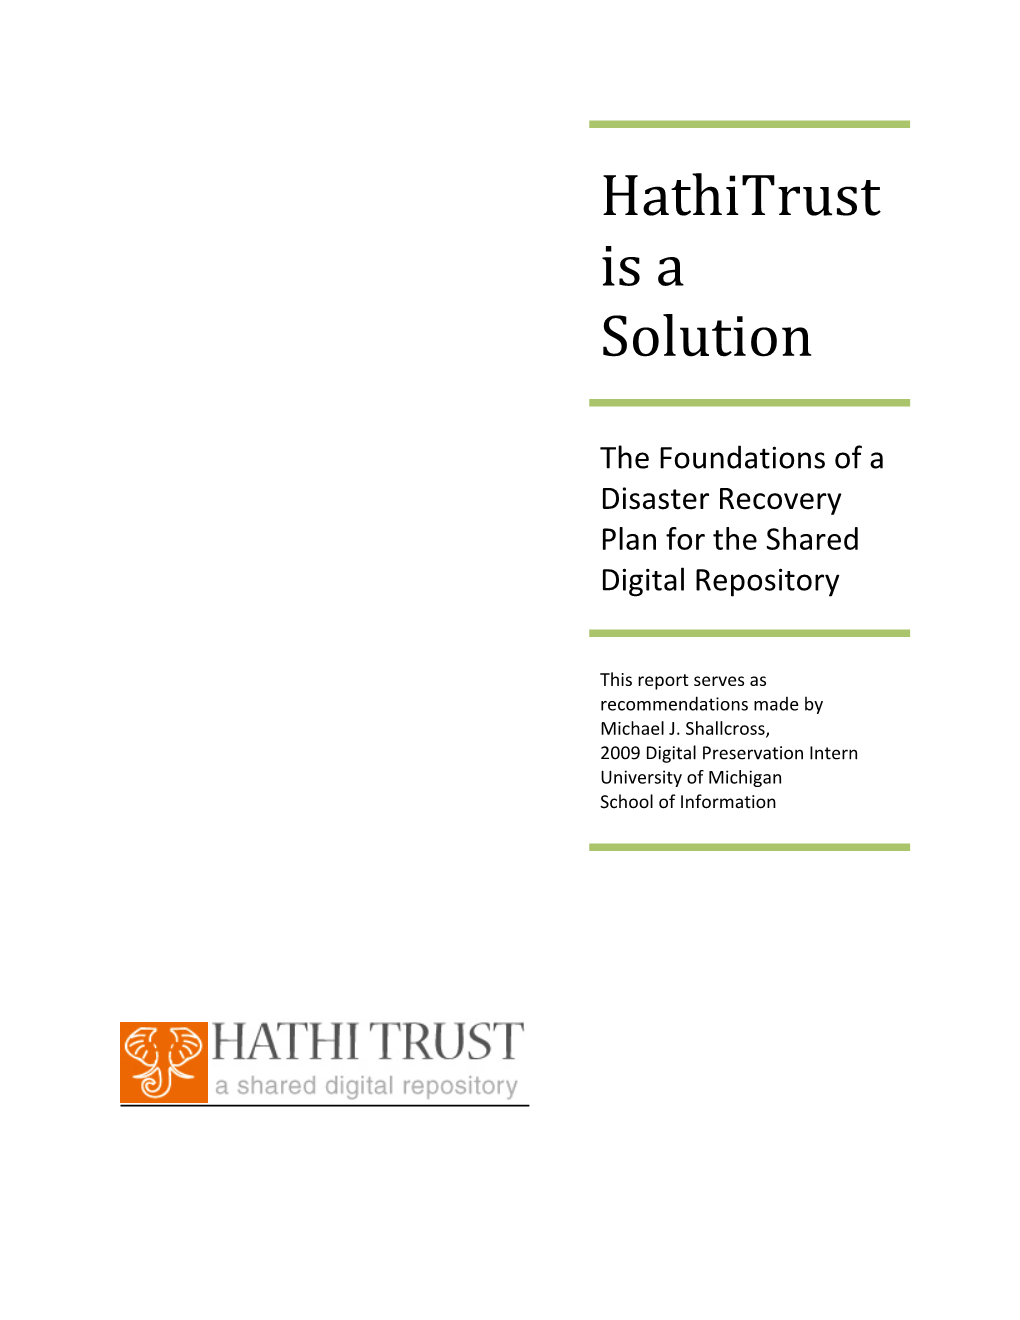 Hathitrust Is a Solution: the Foundations of a Disaster Recovery